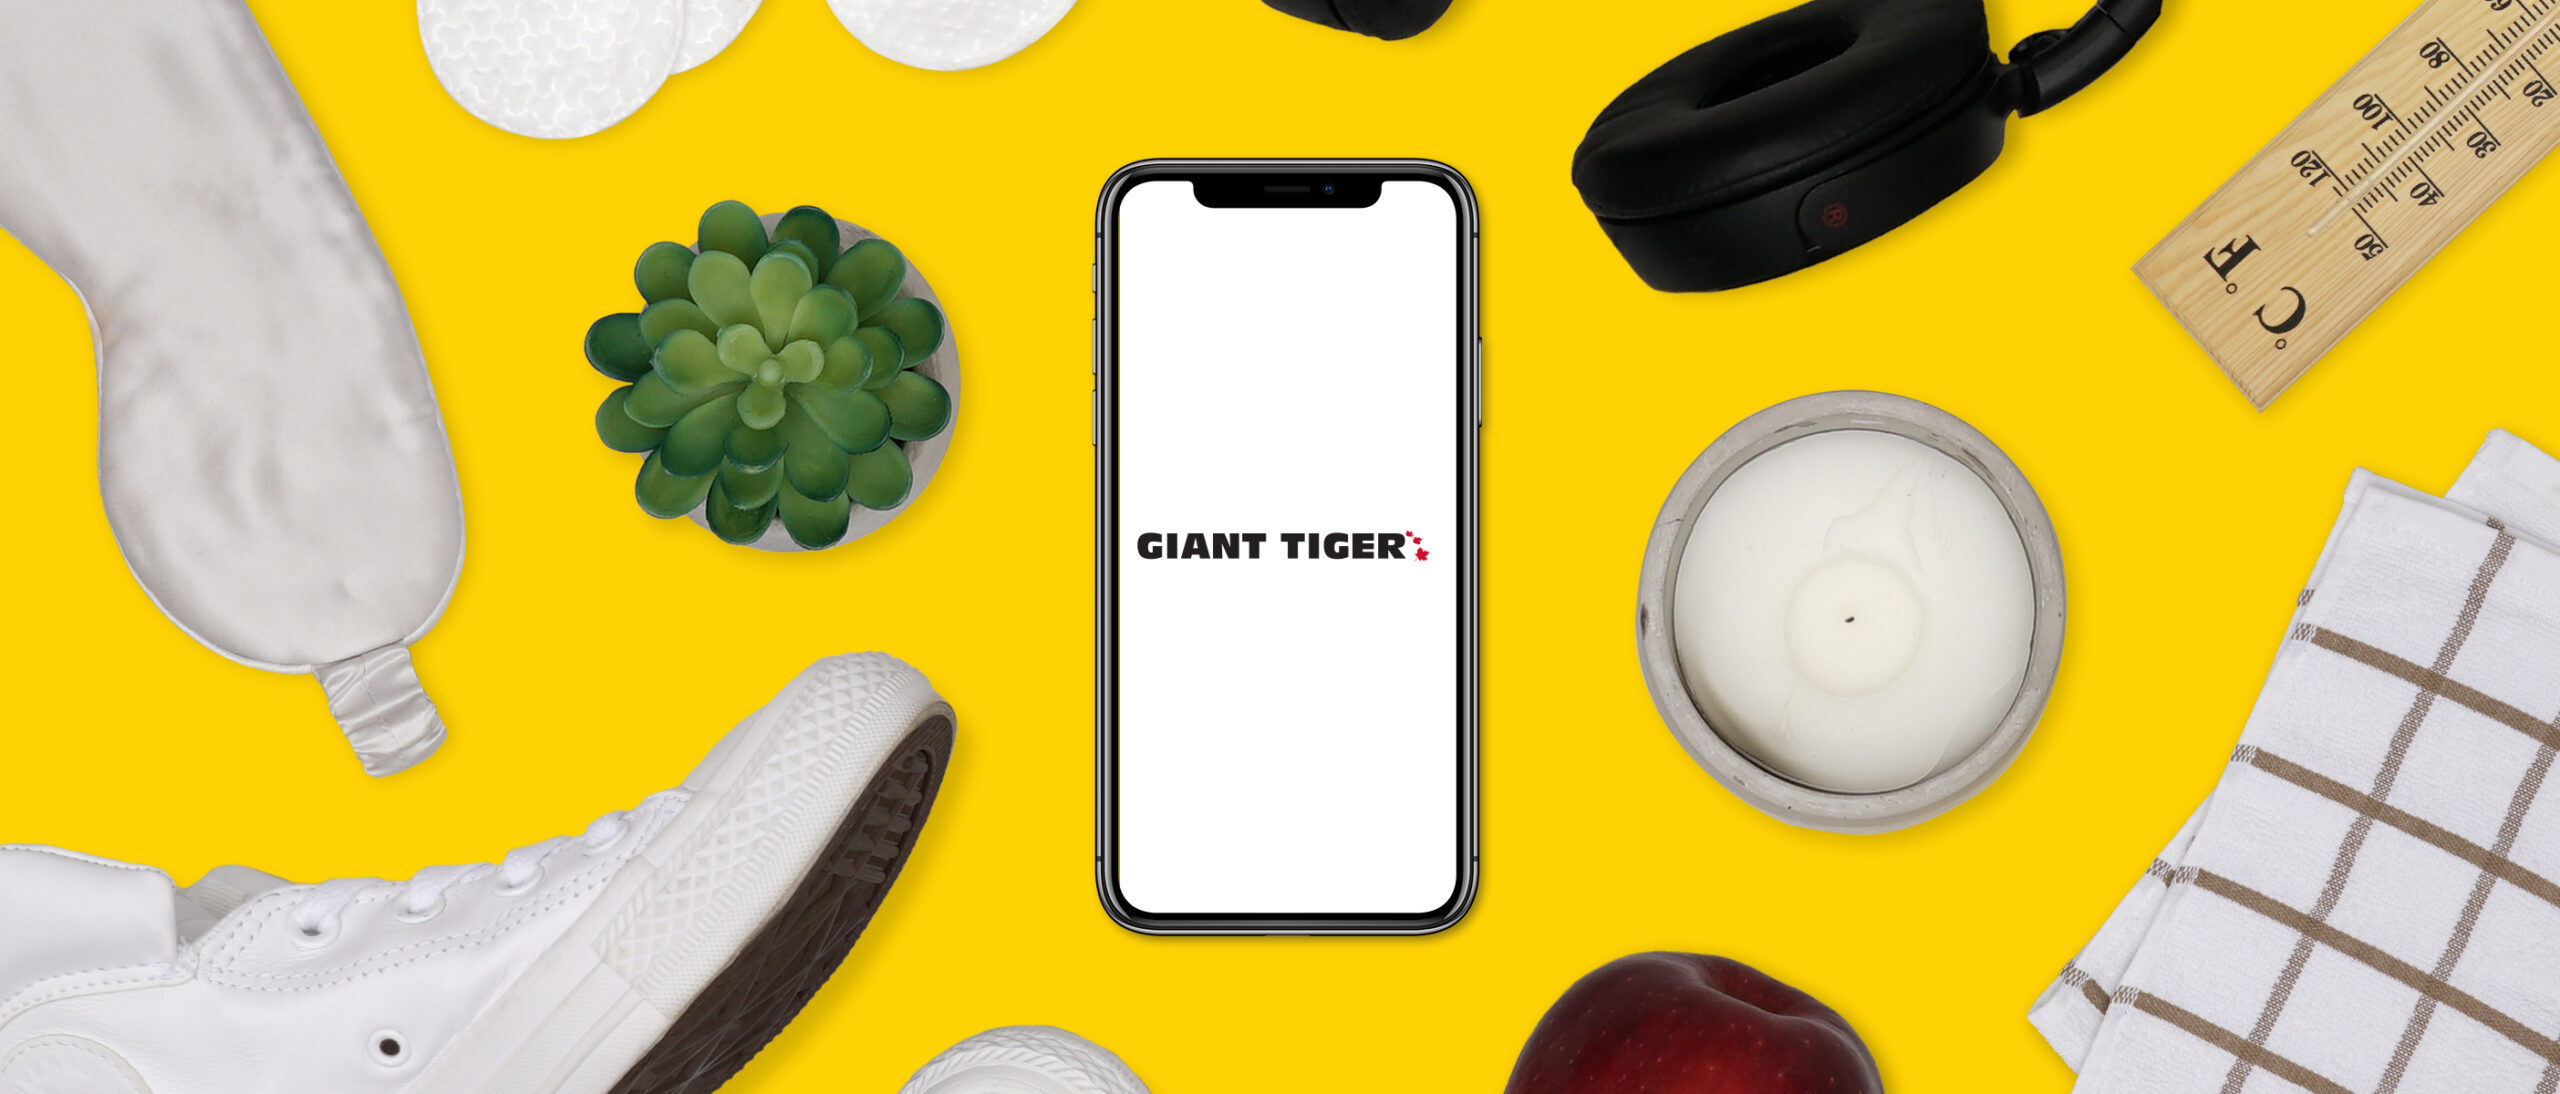 Does Giant Tiger Price Match? Everything You Need To Know